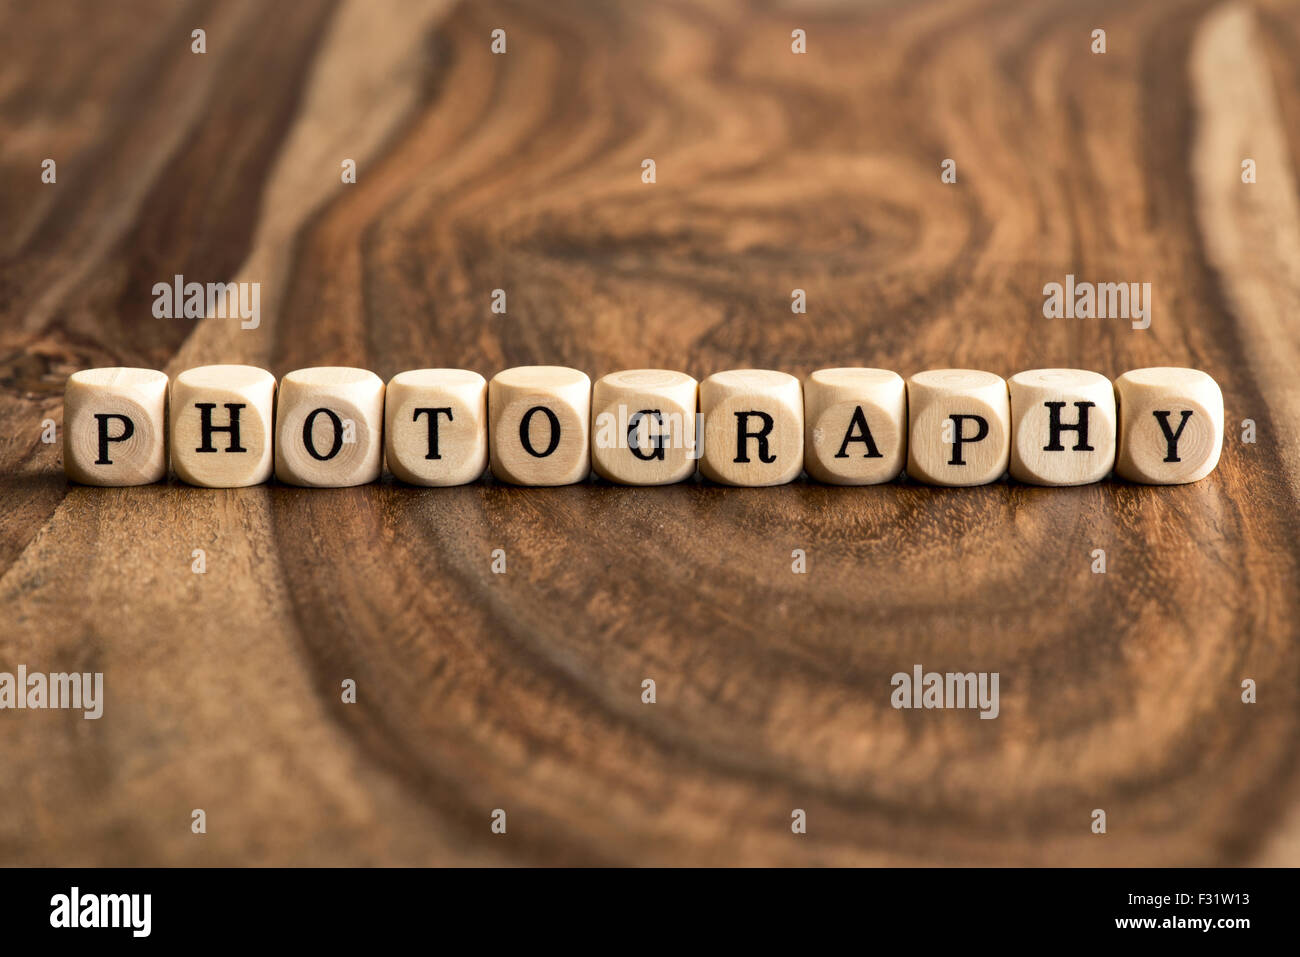 Word PHOTOGRAPHY made with block wooden letters over the wooden board surface Stock Photo